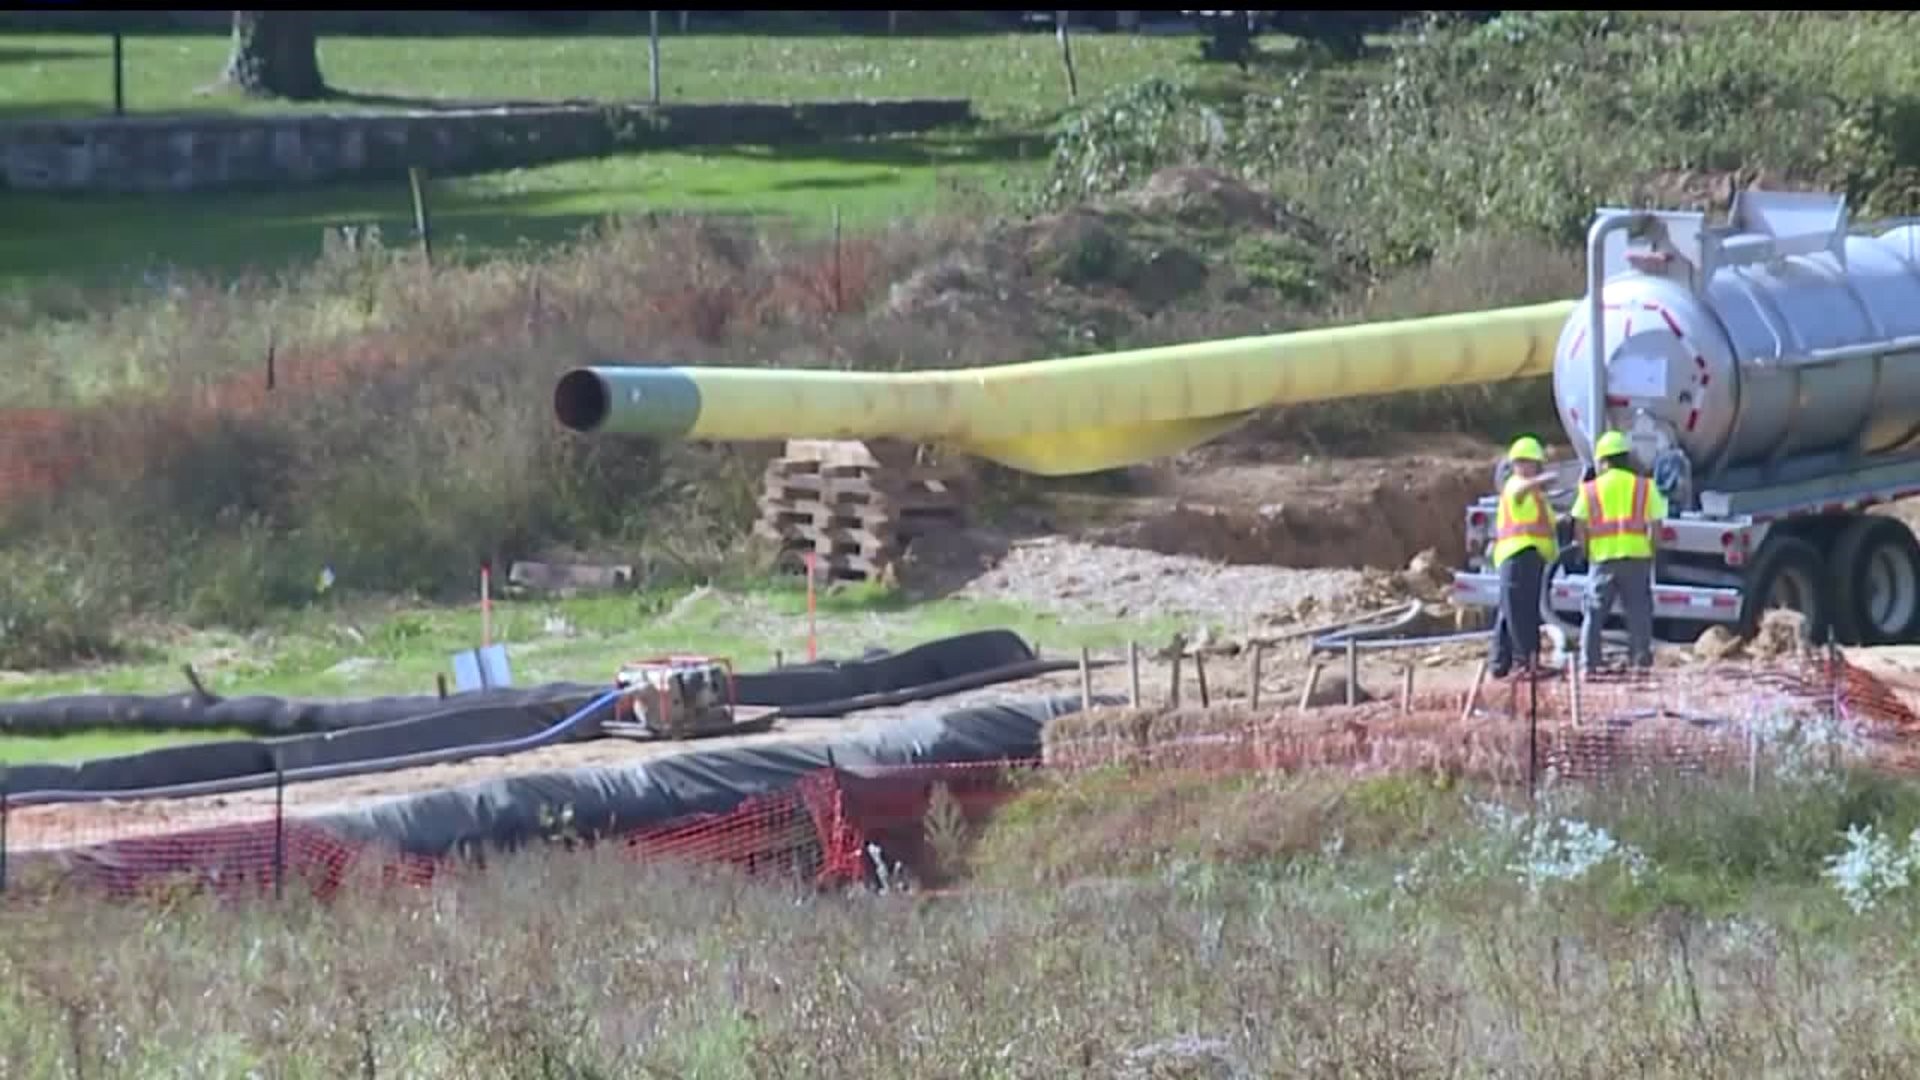 Municipalities apply for grant funding resulting from Sunoco Pipeline fines